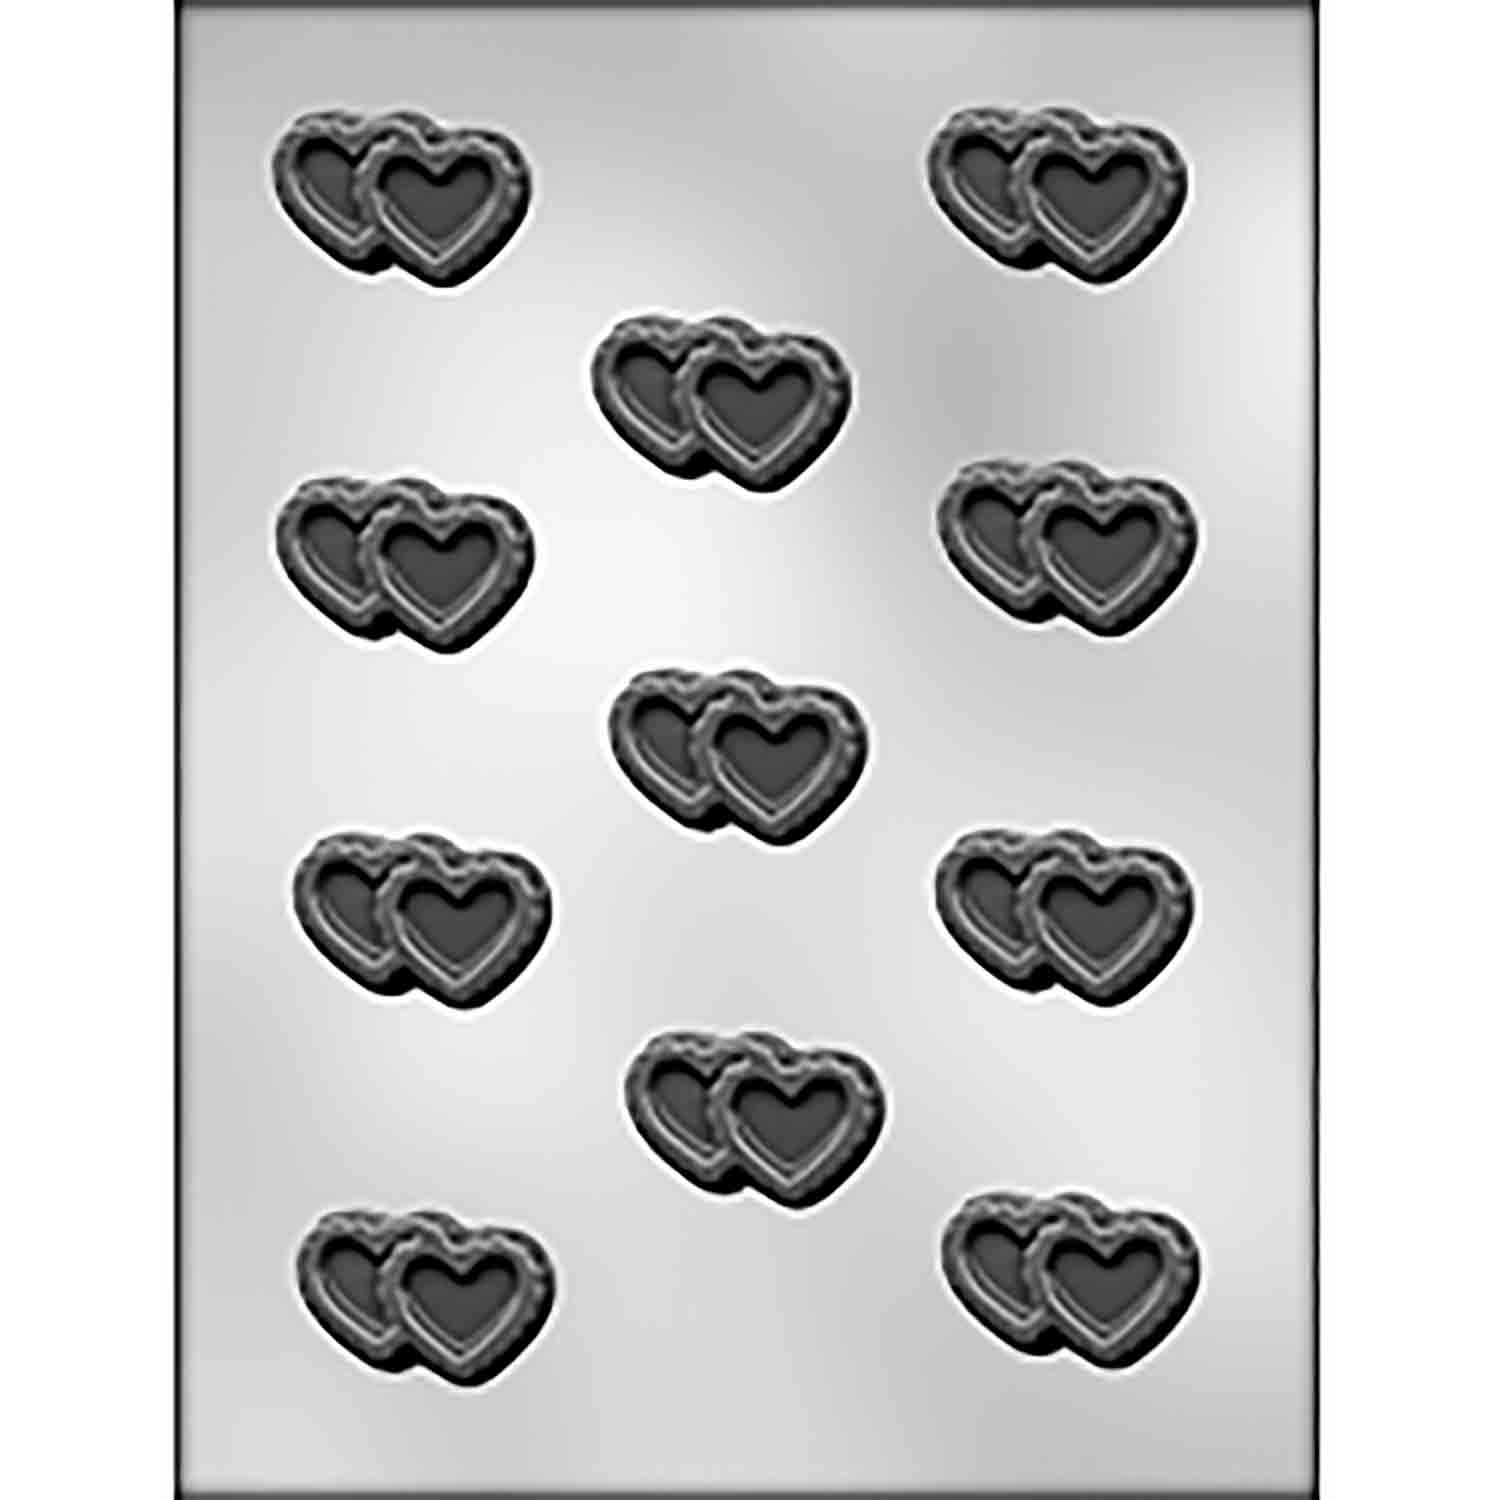 CK Products Double Filigree Heart Chocolate Mold